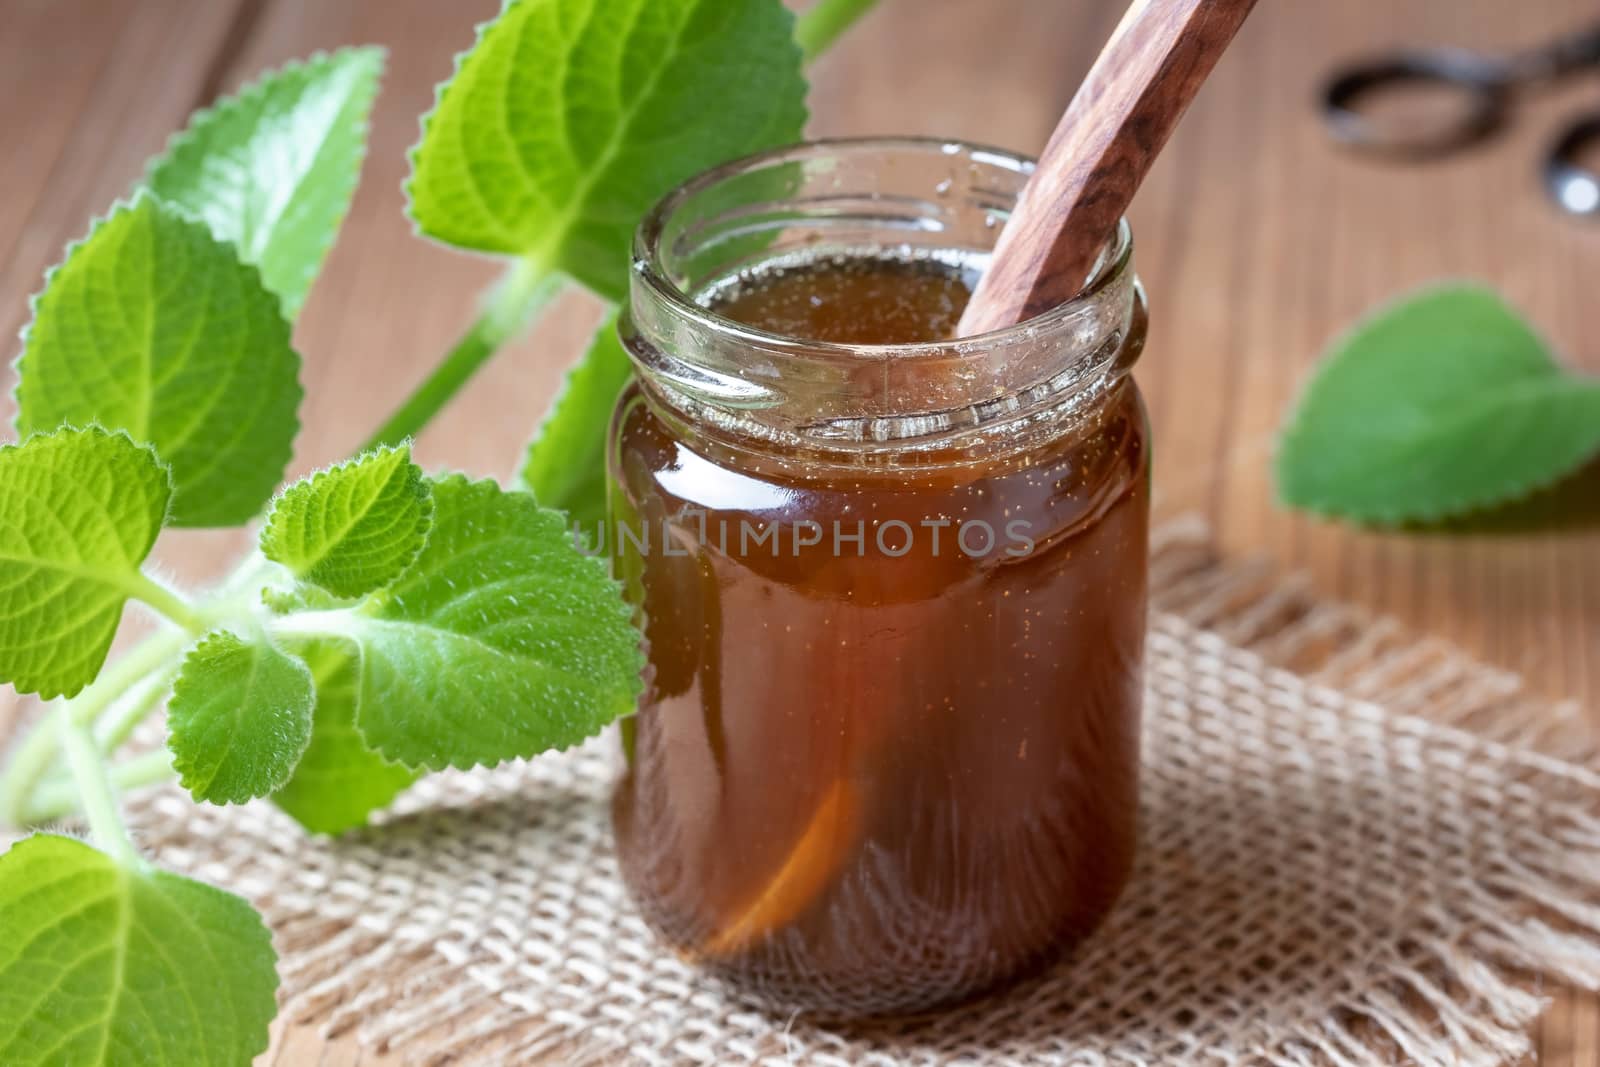 A jar of silver spurflower syrup against common cold with fresh Plectranthus argentatus plant